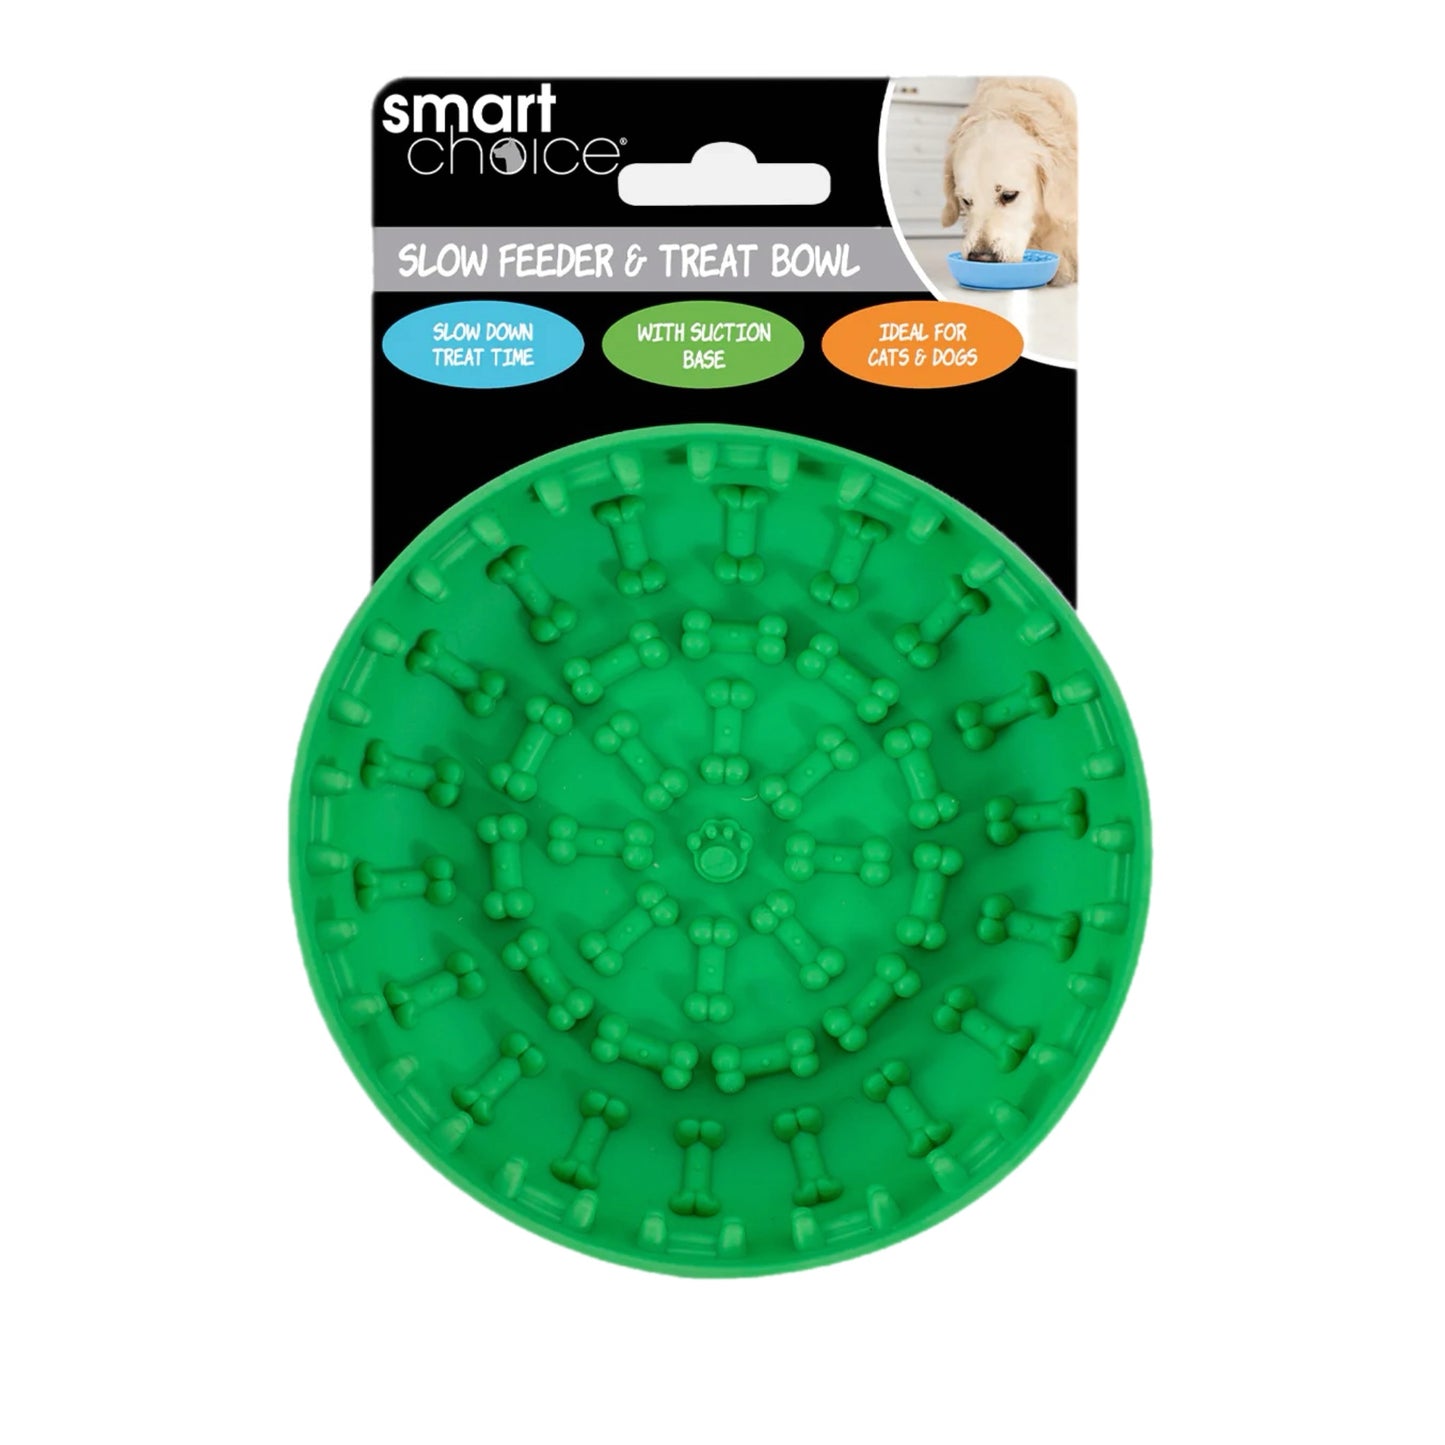 SMART CHOICE Lick & Slow Feeder Dog Bowl Assorted Colours